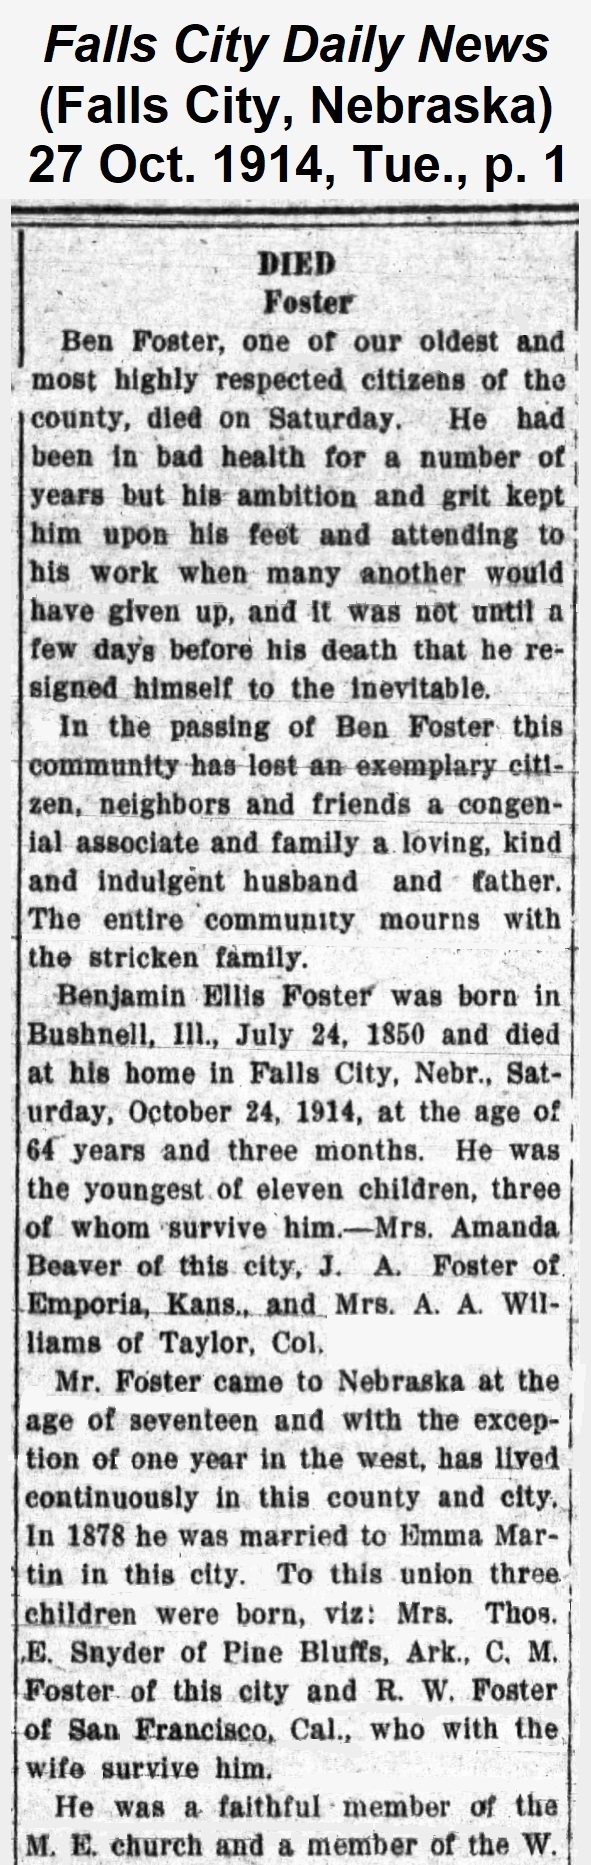 First part of obituary of Ben Foster from
                The Falls City Daily News of 27 October 1914.